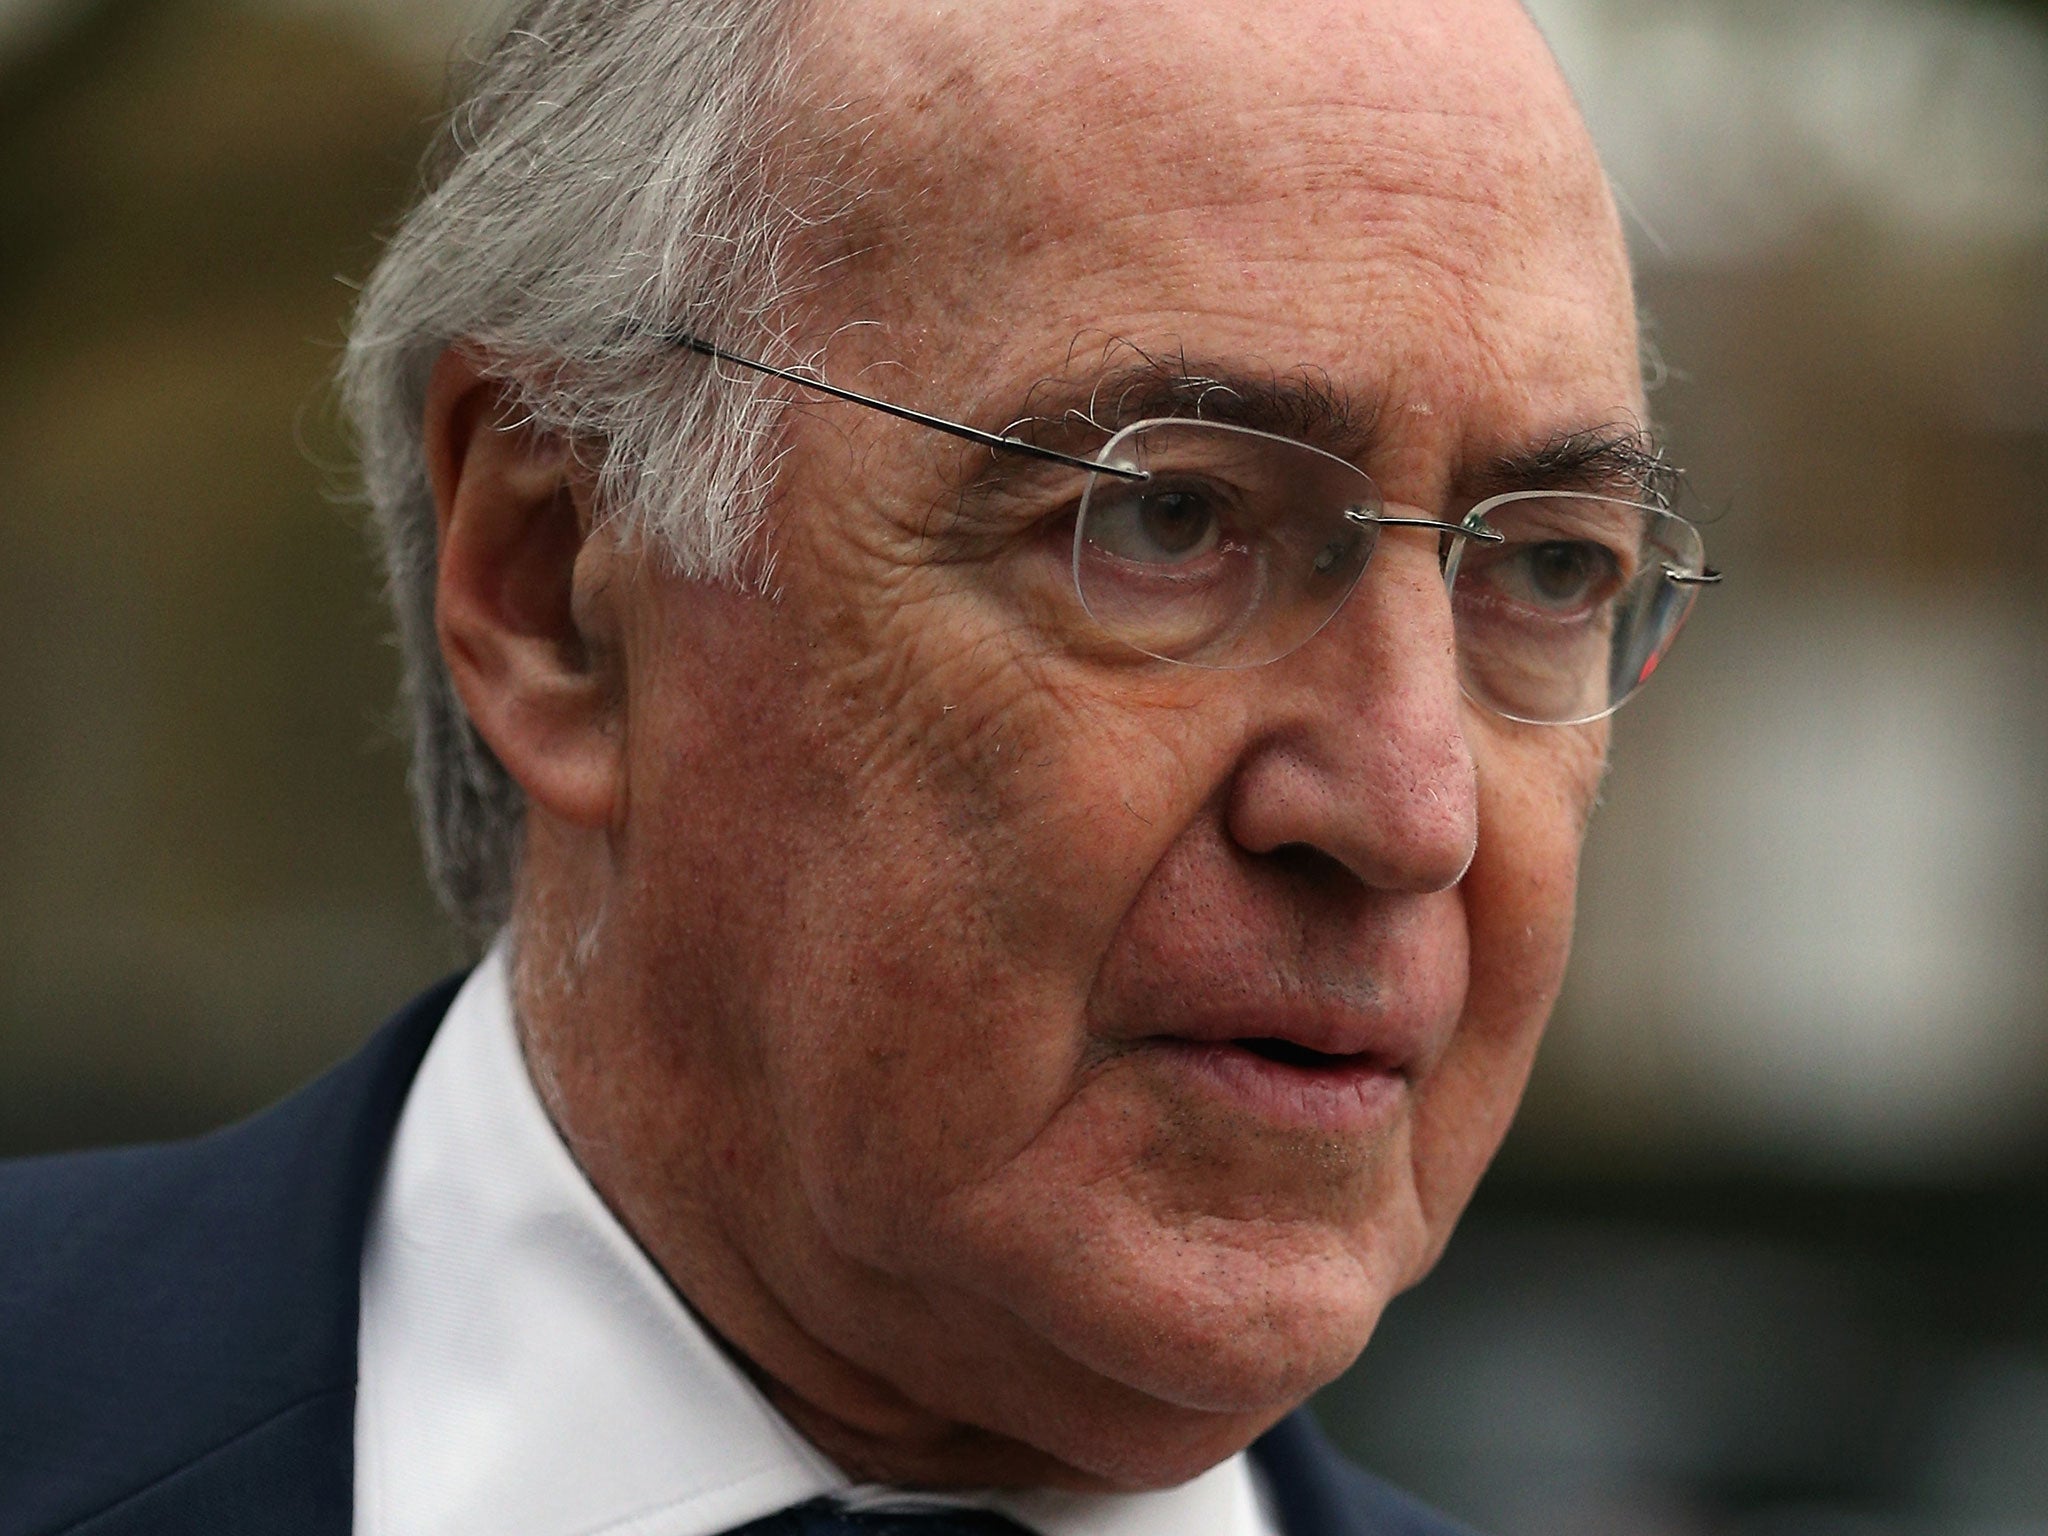 Lord Michael Howard said a new report should encourage political leaders to cut emissions based on scientists’ recommendations